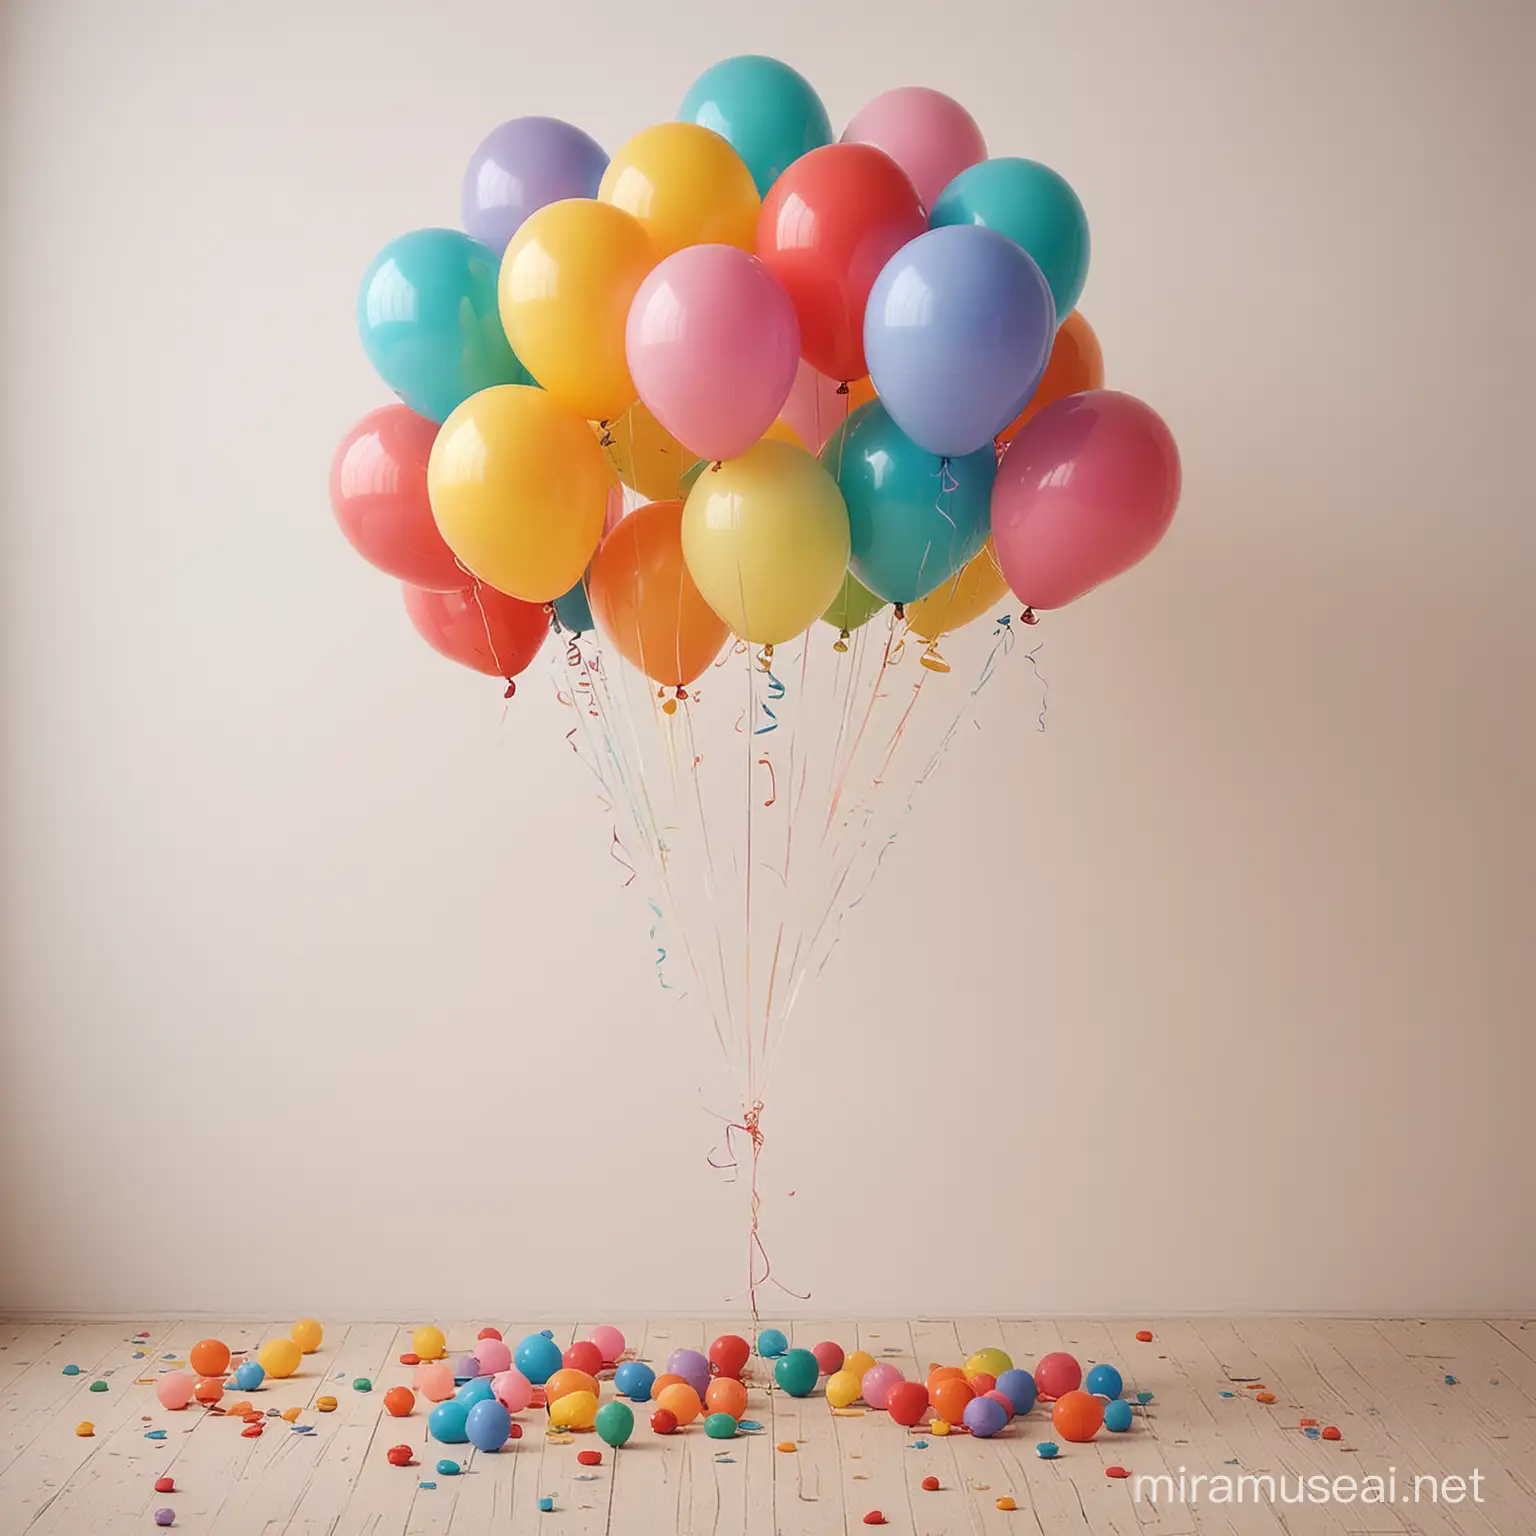 Cheerful Childlike Balloons Floating in the Sky